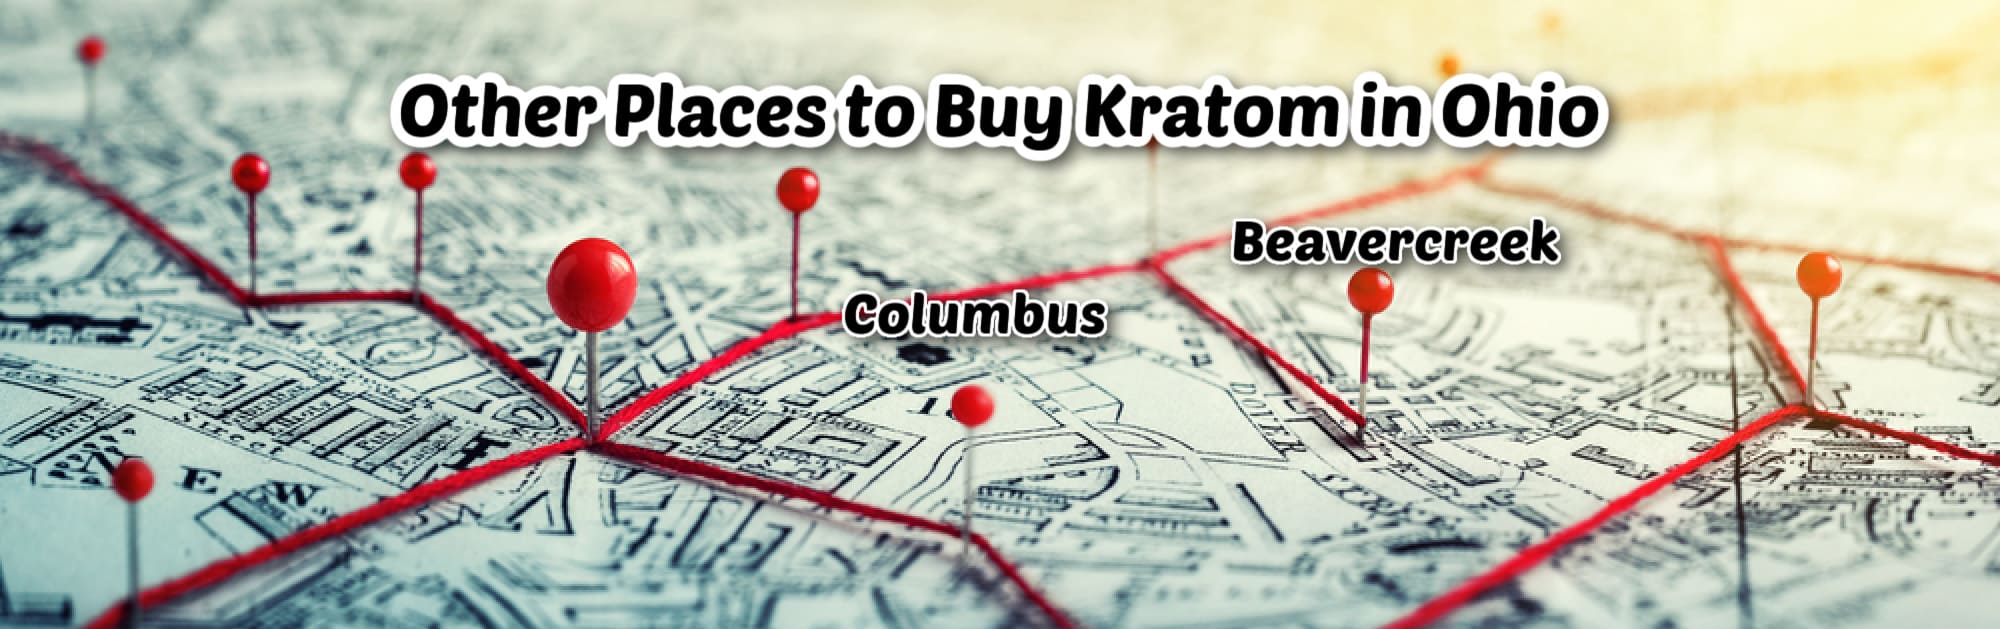 image of other places to buy kratom in ohio